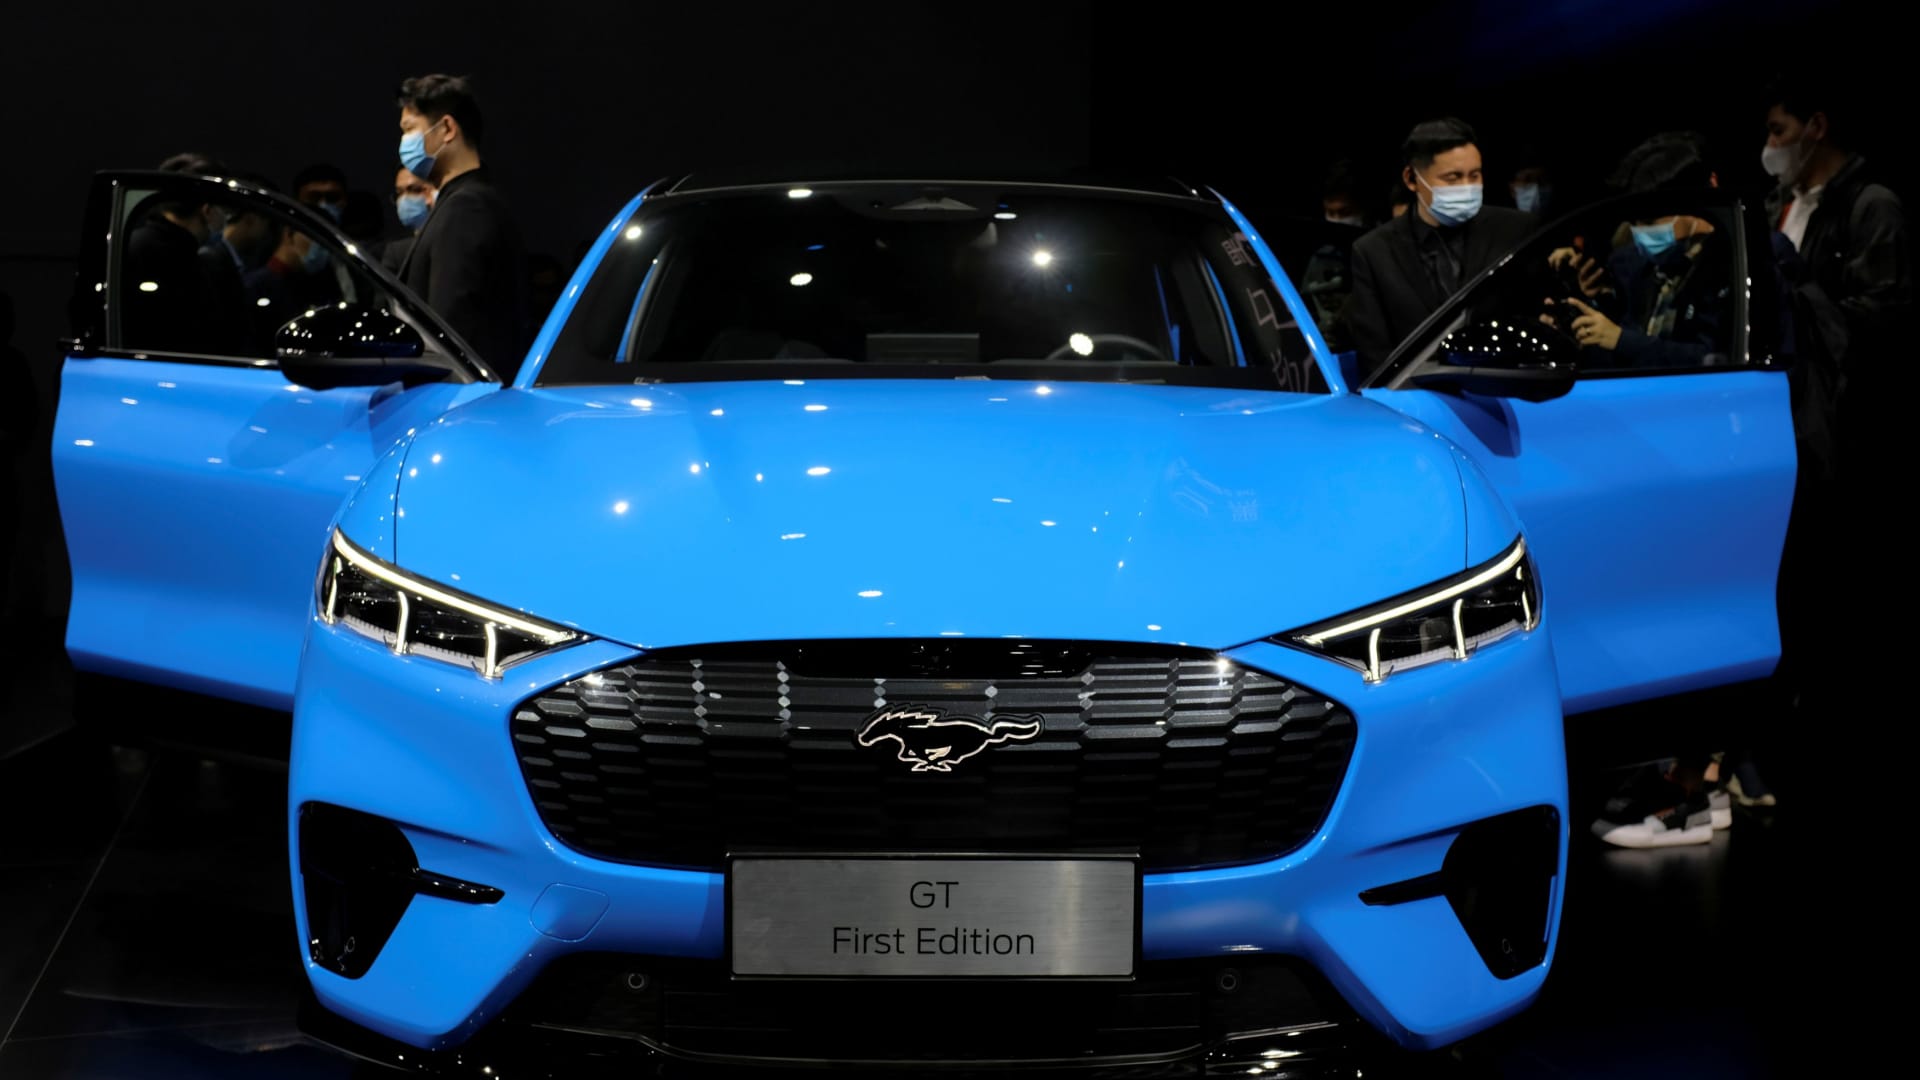 Visitors check on a Ford Mustang Mach-E electric vehicle displayed at a launch event in Shanghai, China April 13, 2021.